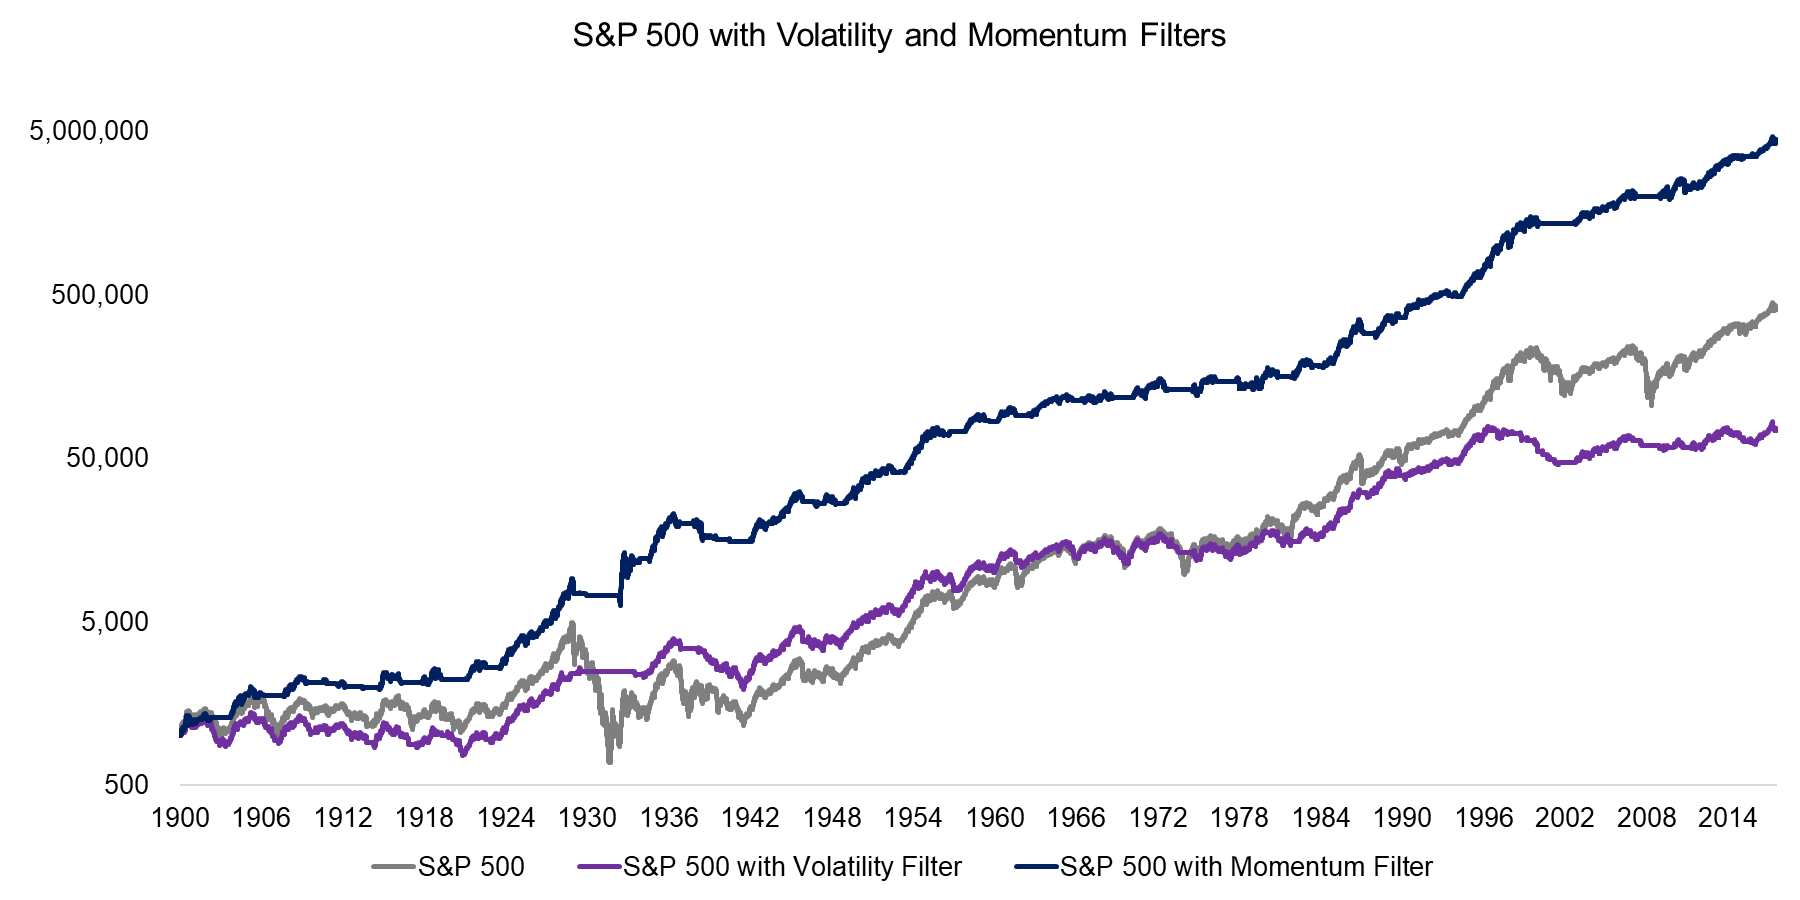 S&P 500 with Volatility and Momentum Filters